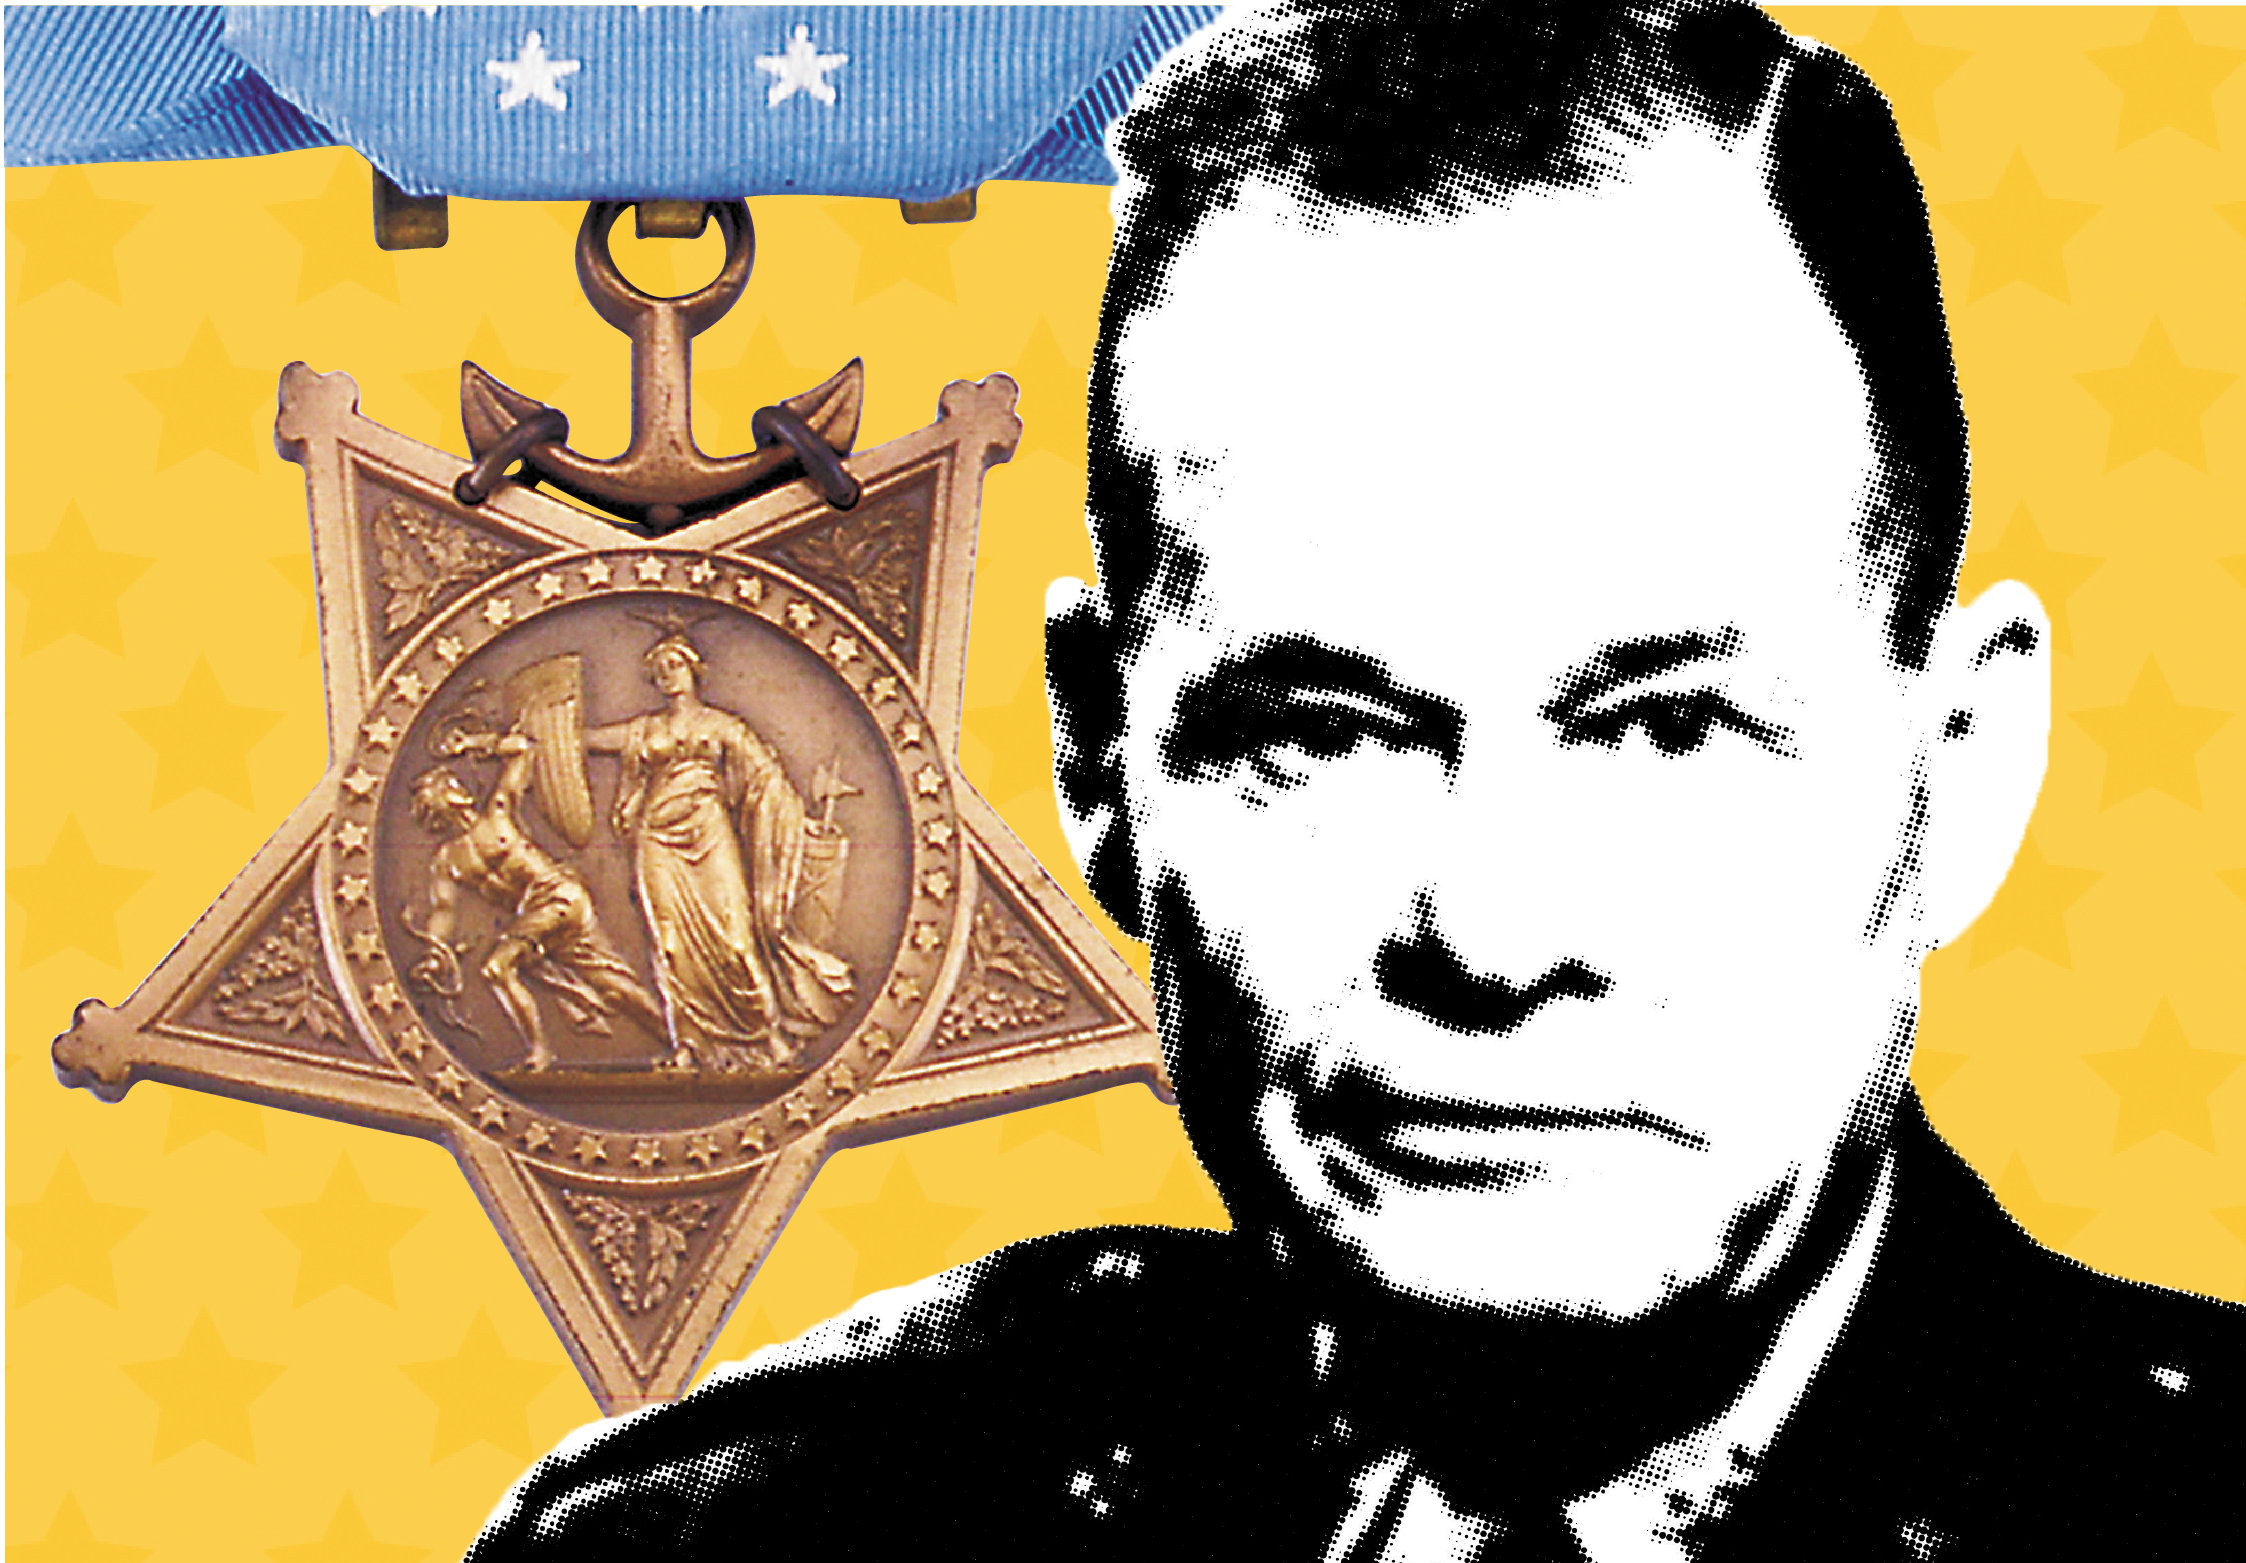 Is it time to give Chesty Puller the Medal of Honor?